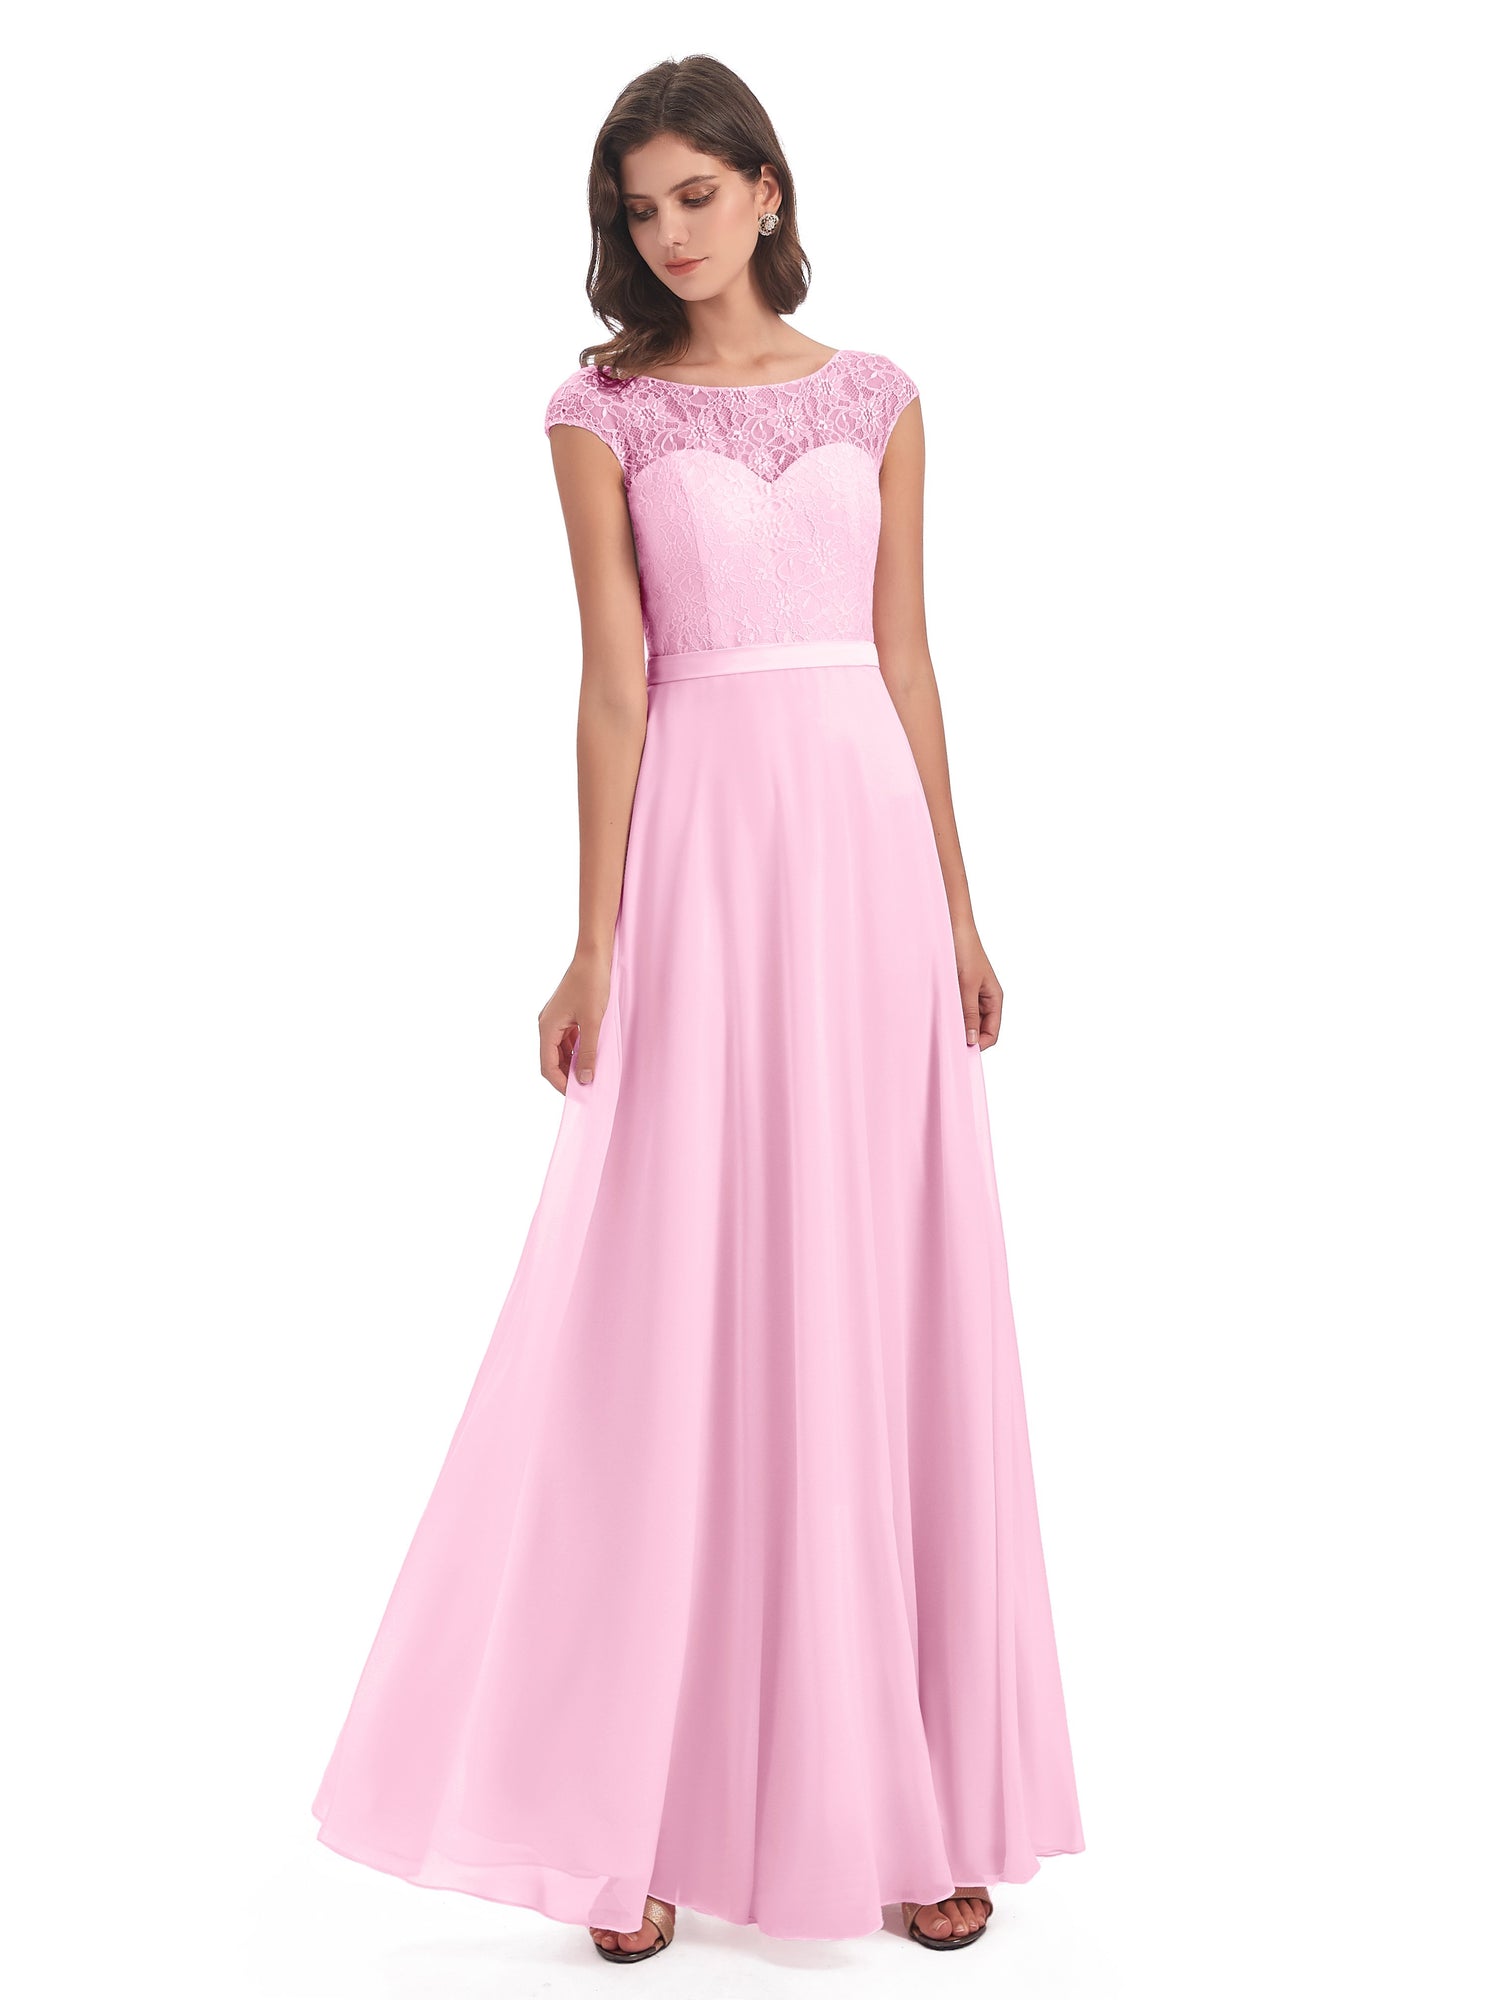 Elegant Long Illusion Neck Bridesmaid Dress with Lace Cap Sleeves TBQP364